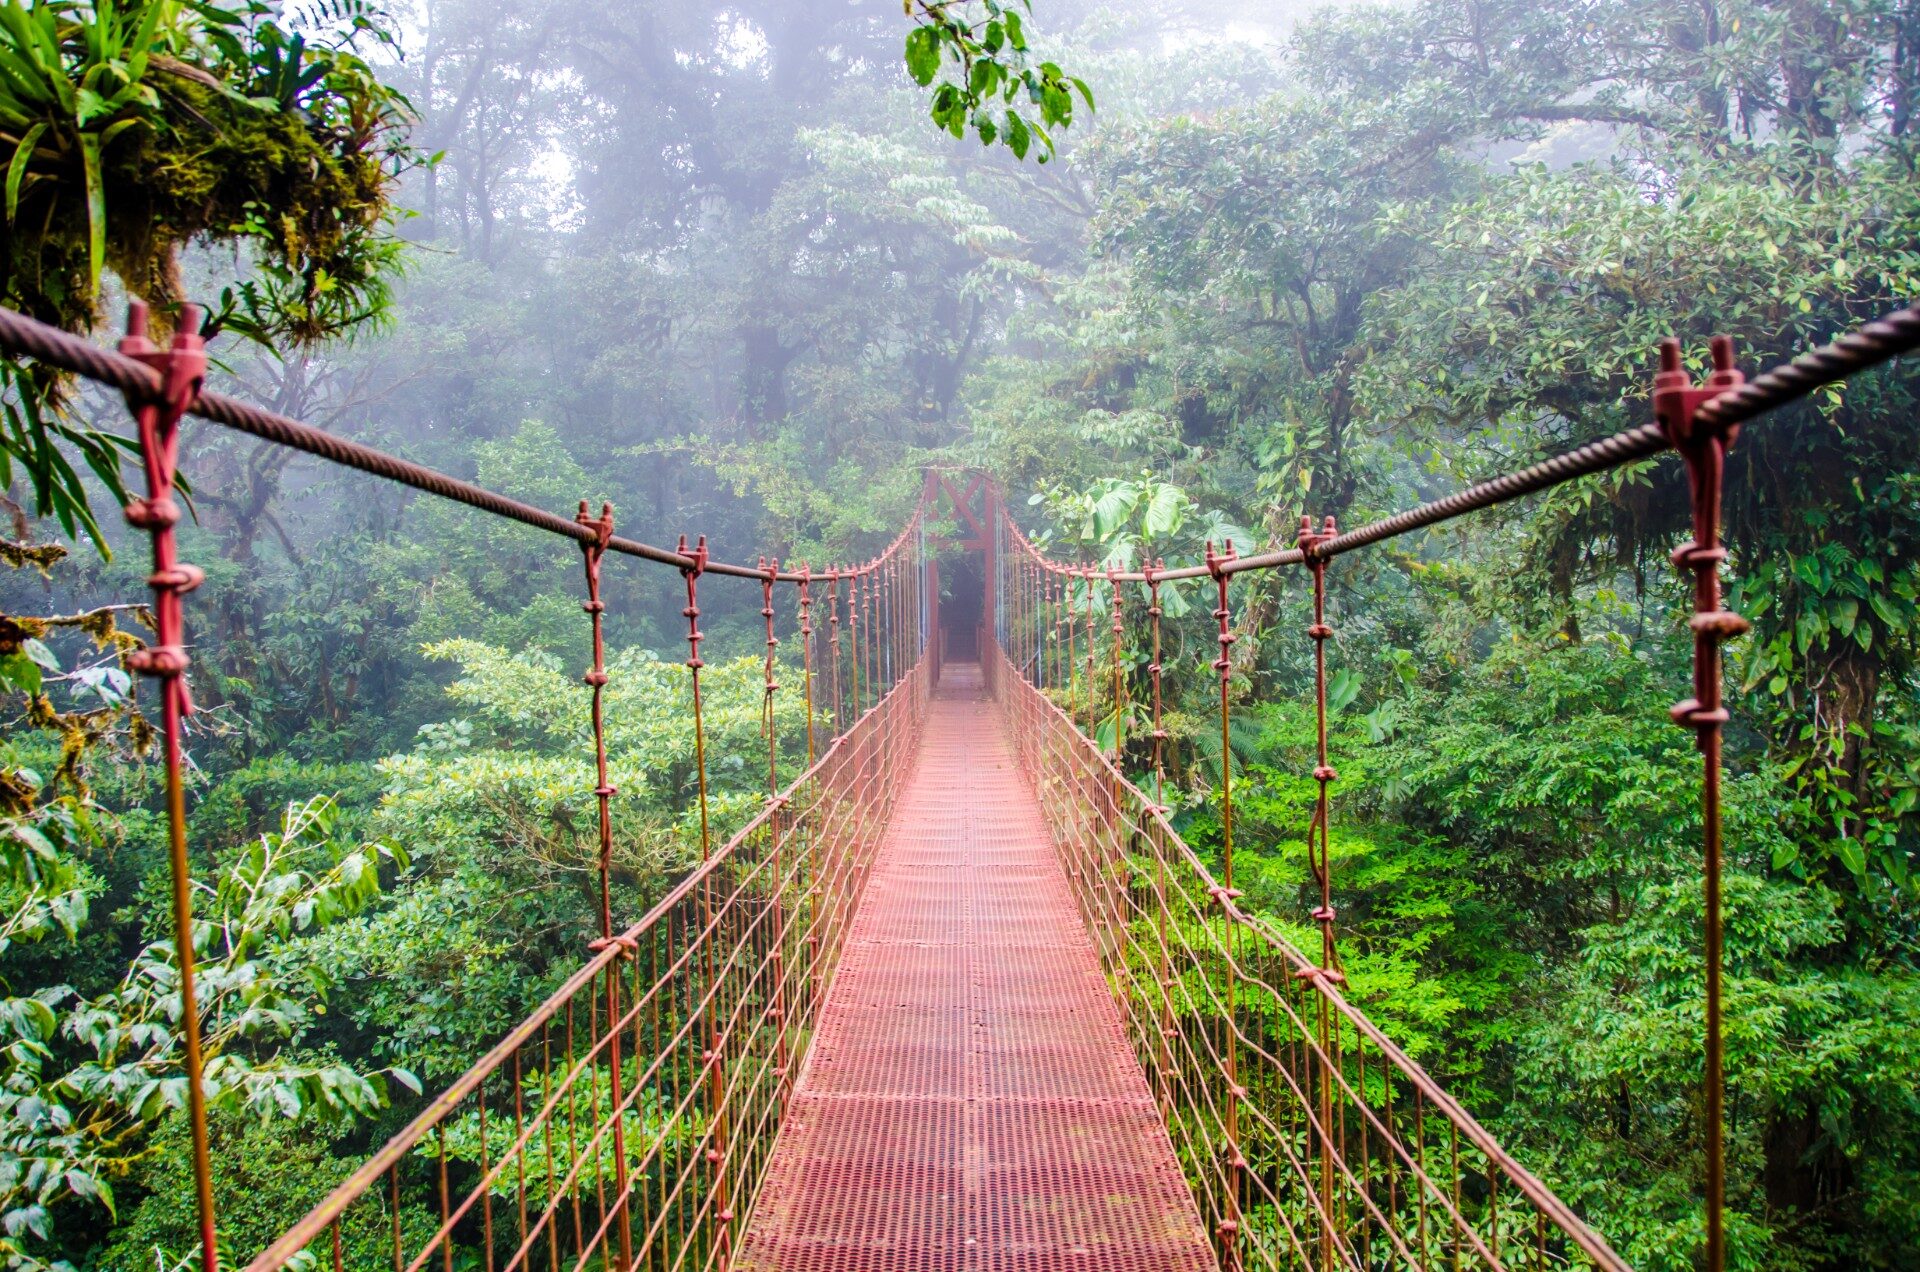 How to Visit Costa Rica in the Rainy Season: Best Regions